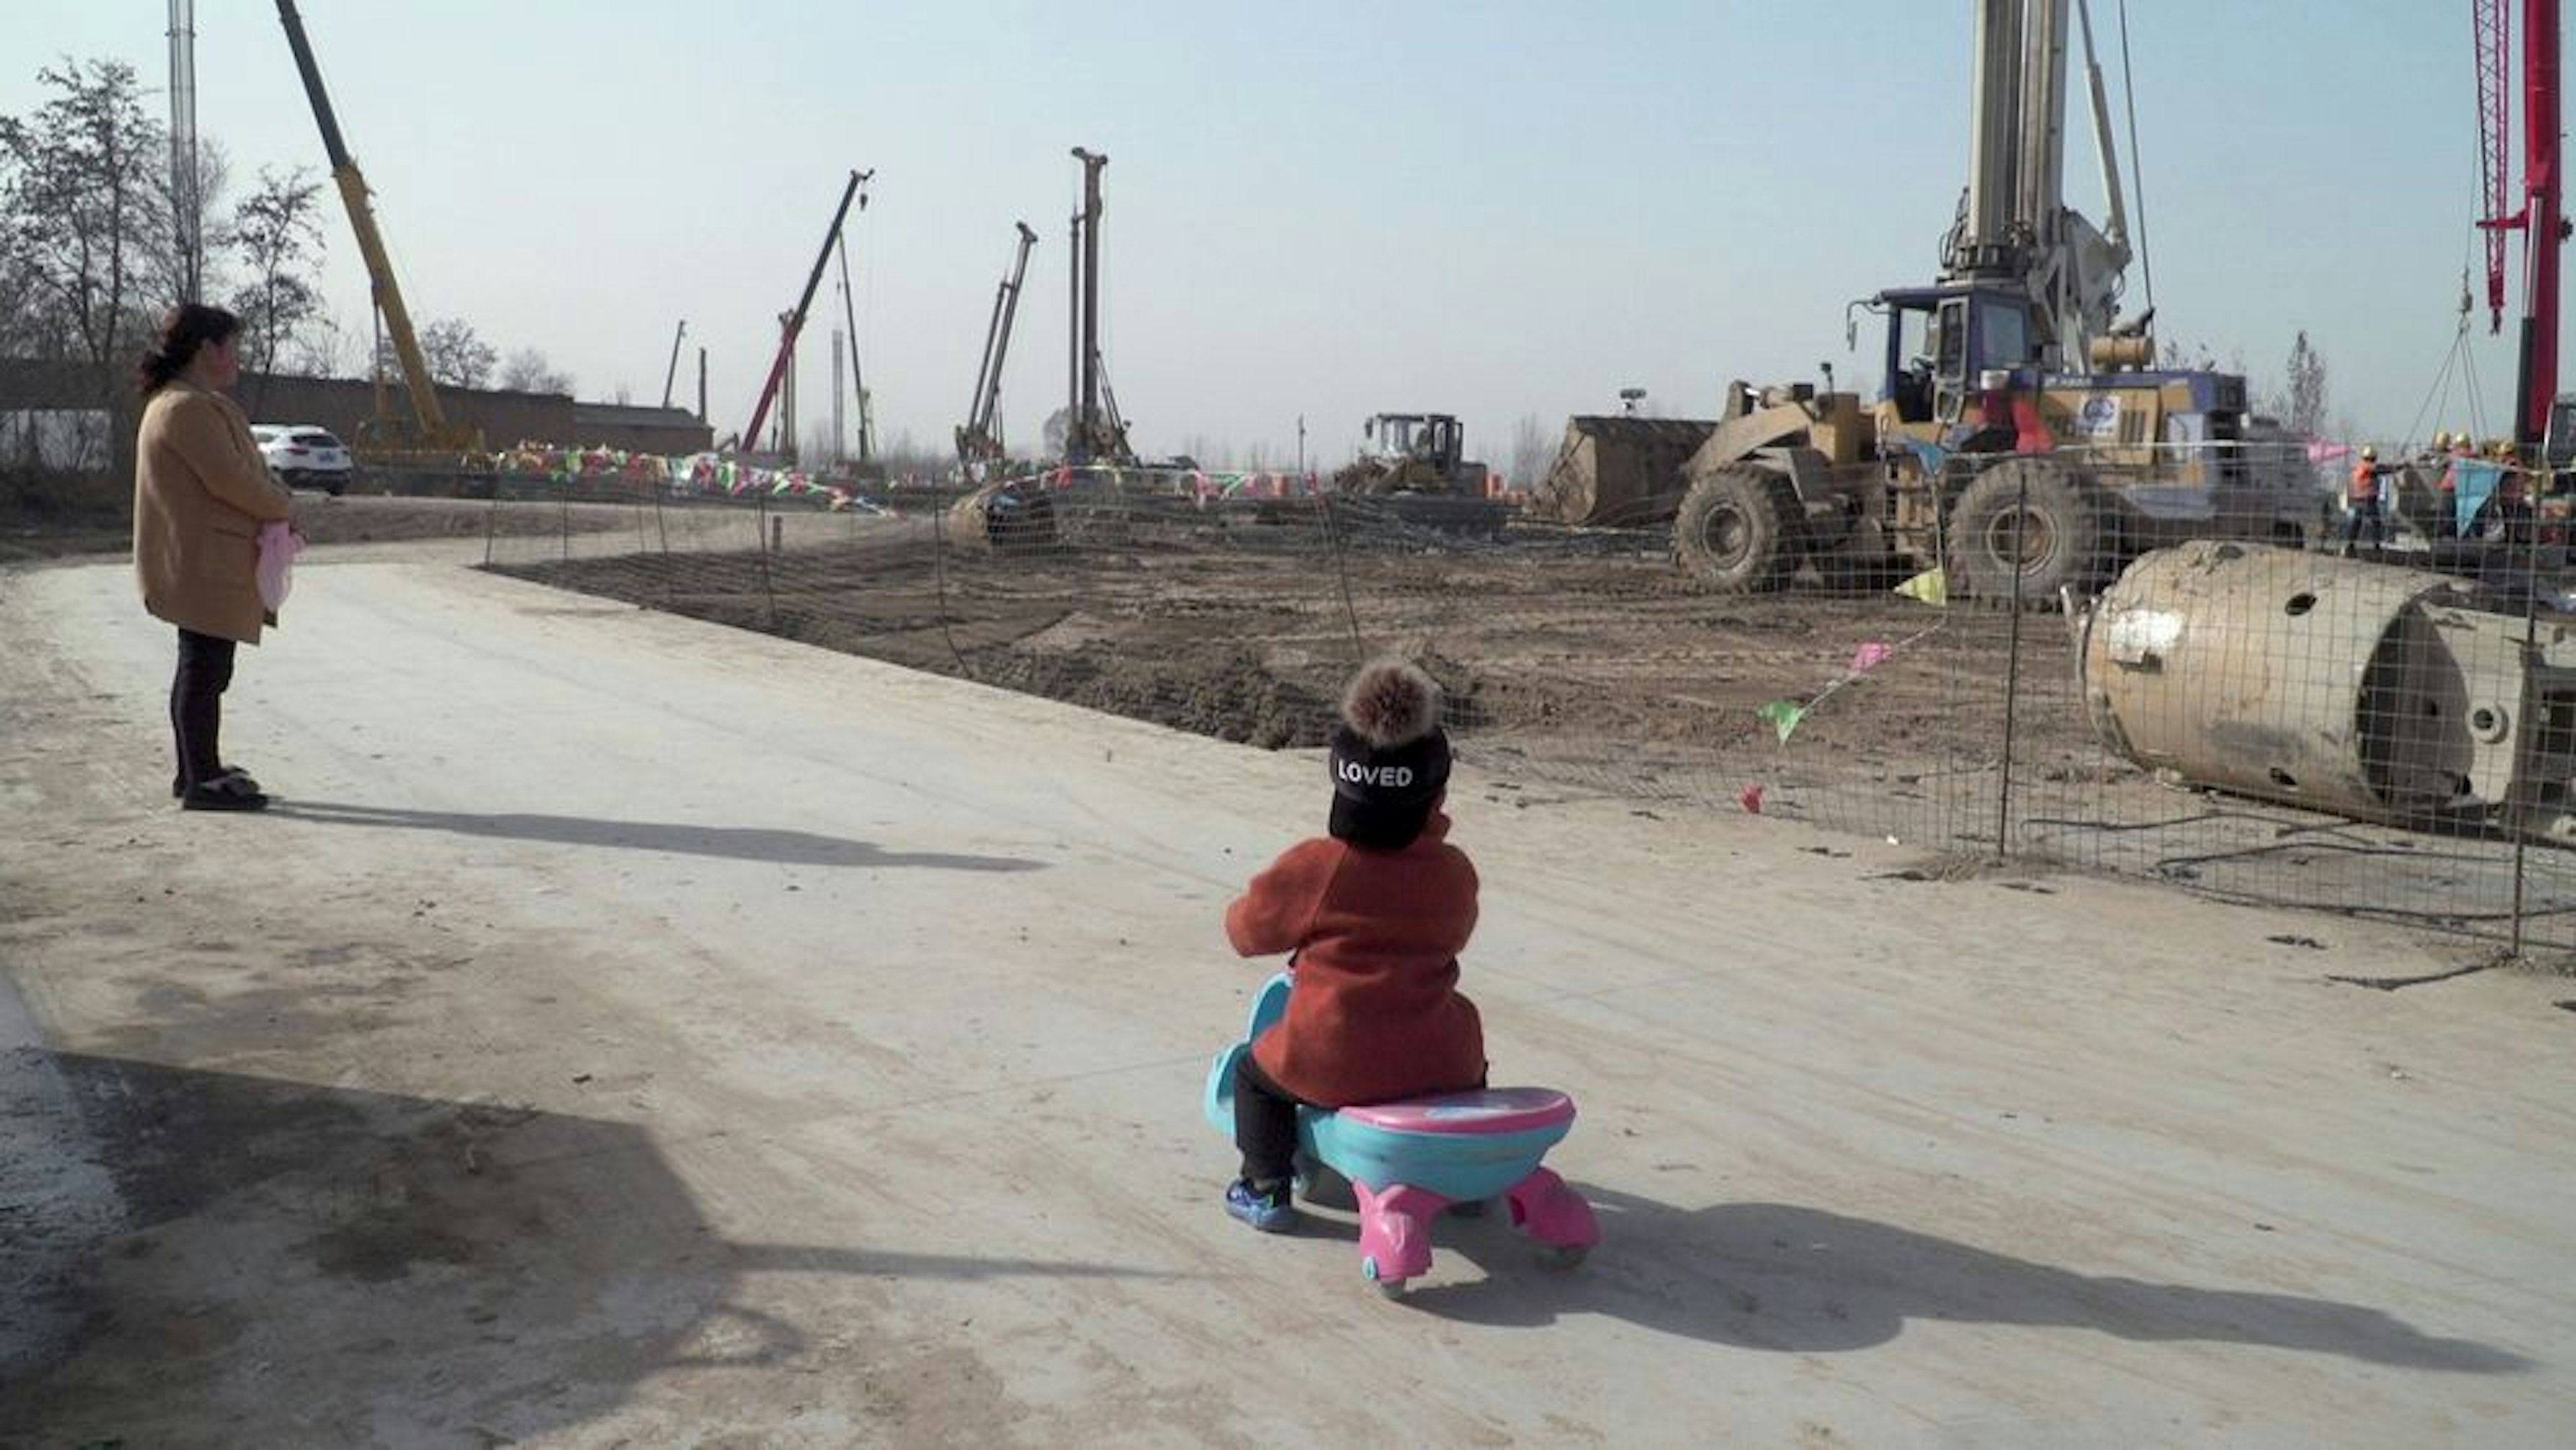 A woman and child stand and watch a construction site. The child is on a bike and wears a hat that says “Loved”.